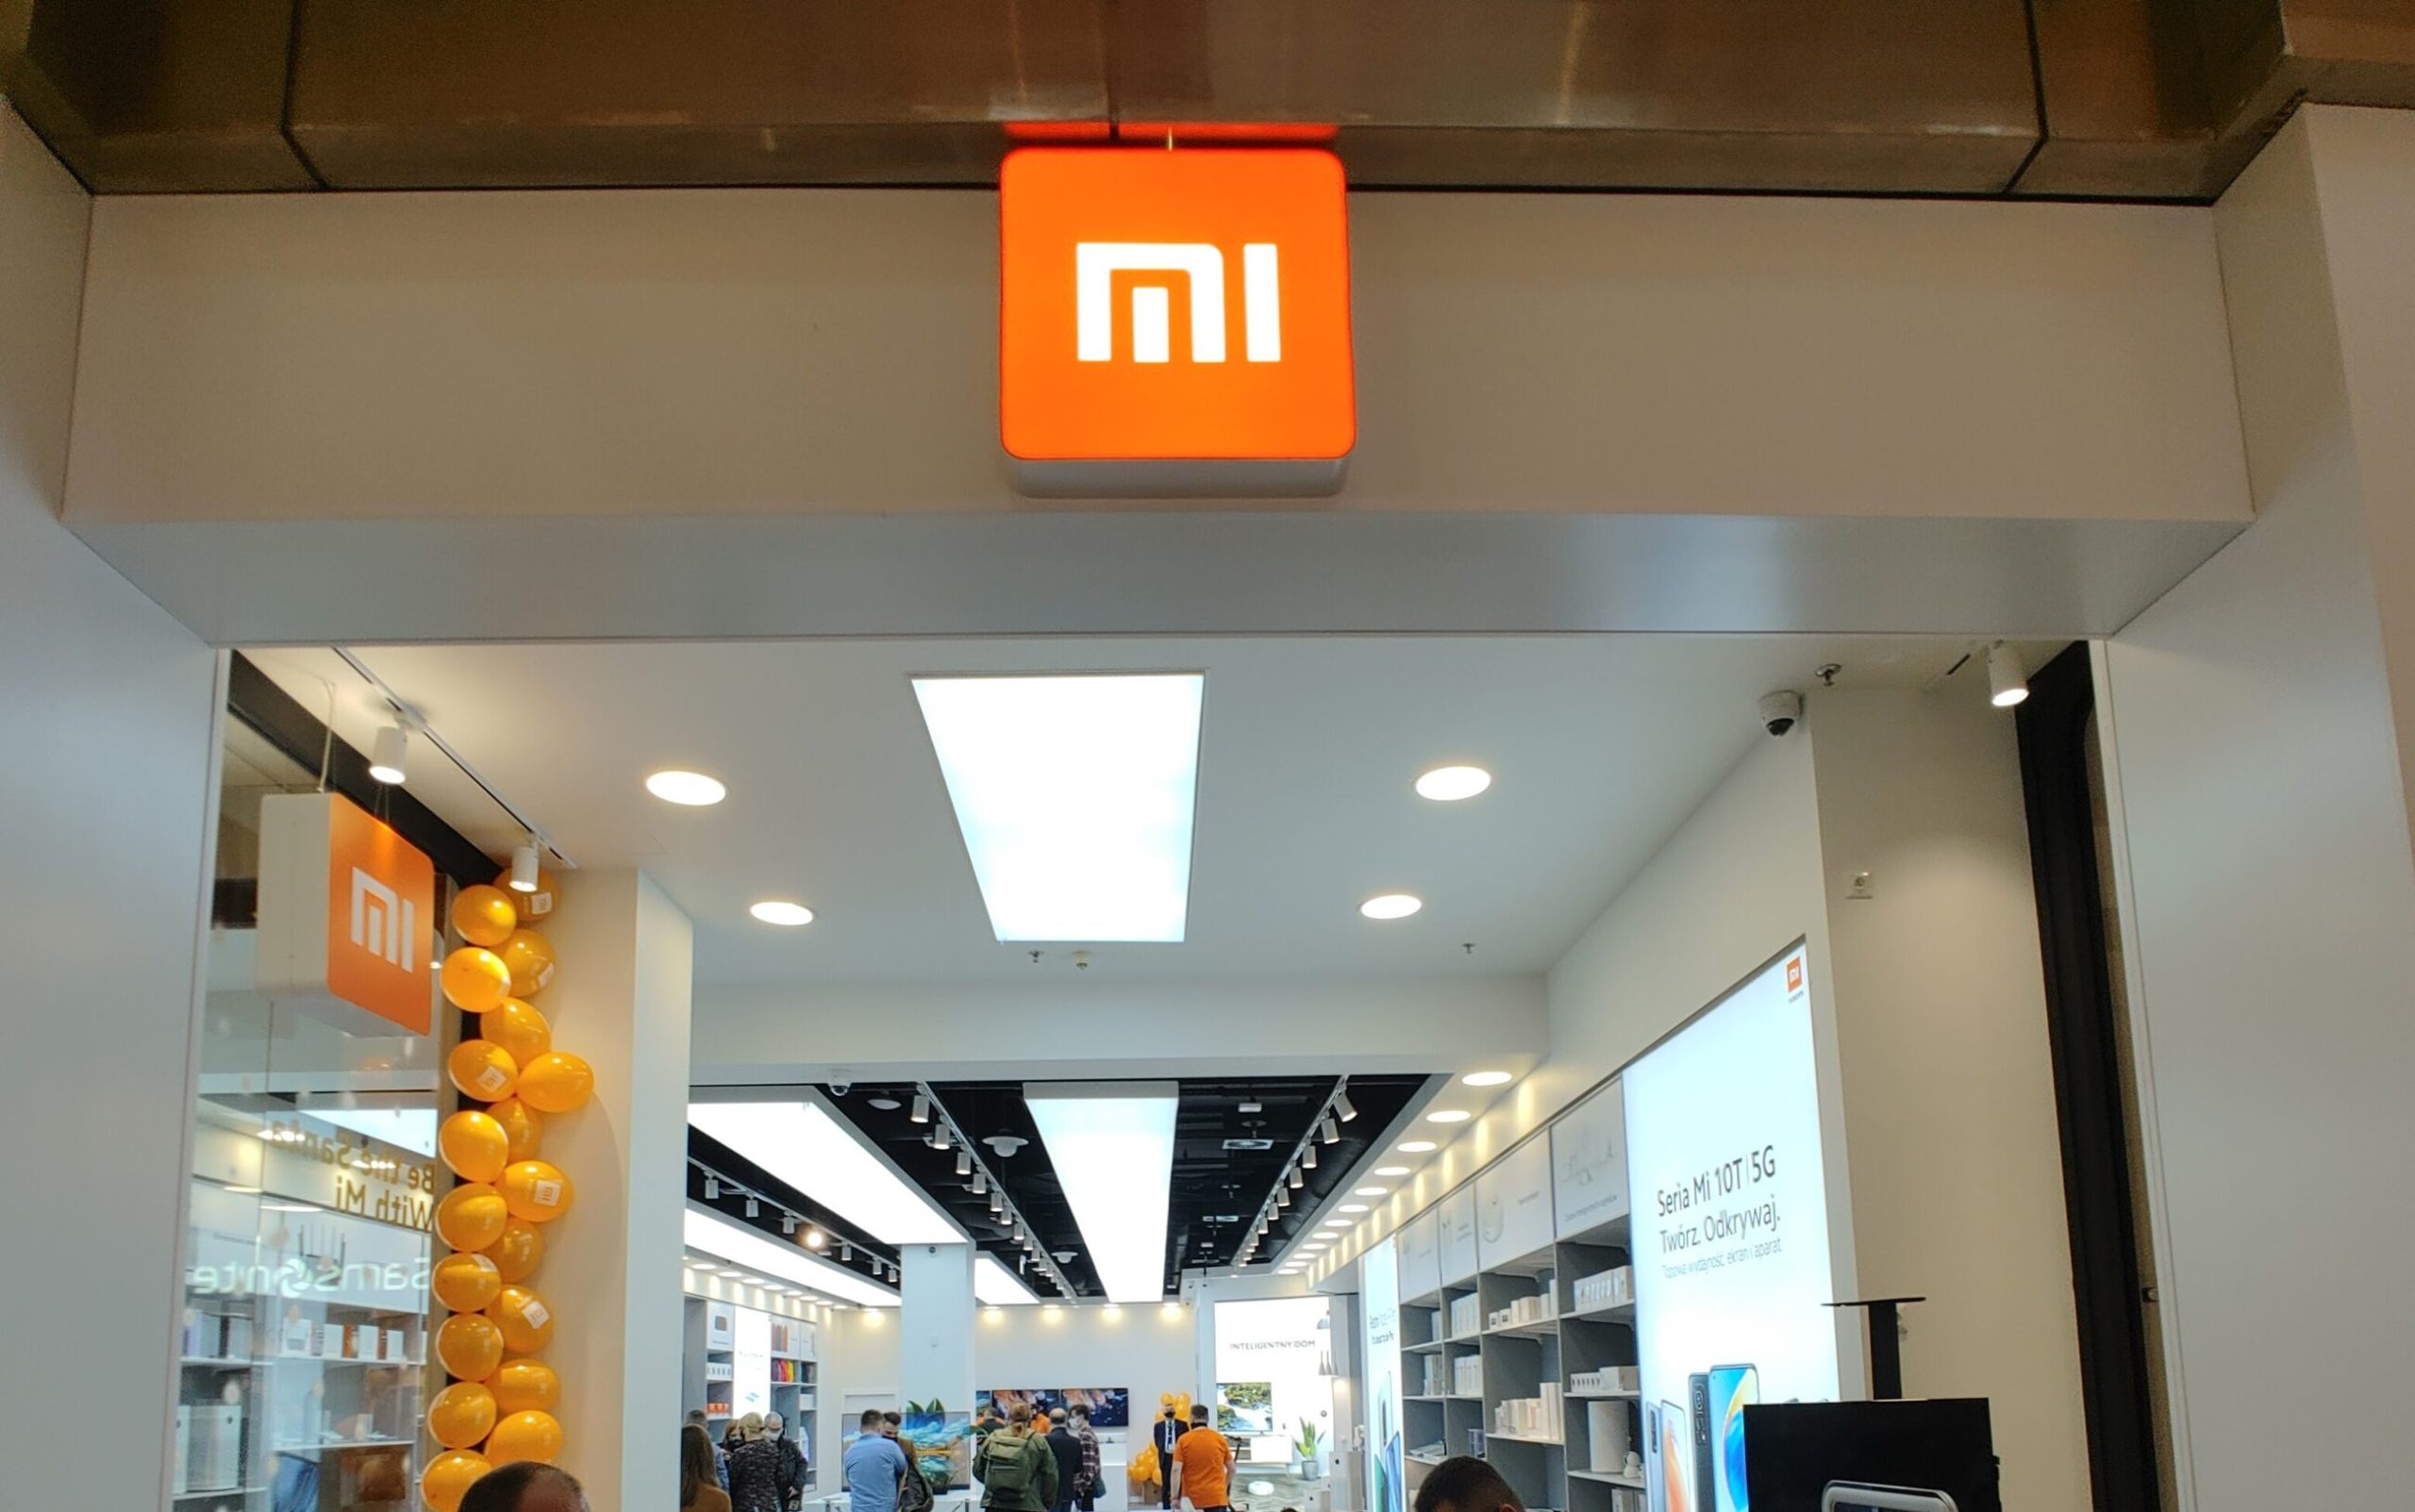 Xiaomi smartphones can censor and send user information to China?  That's what Lithuanians say